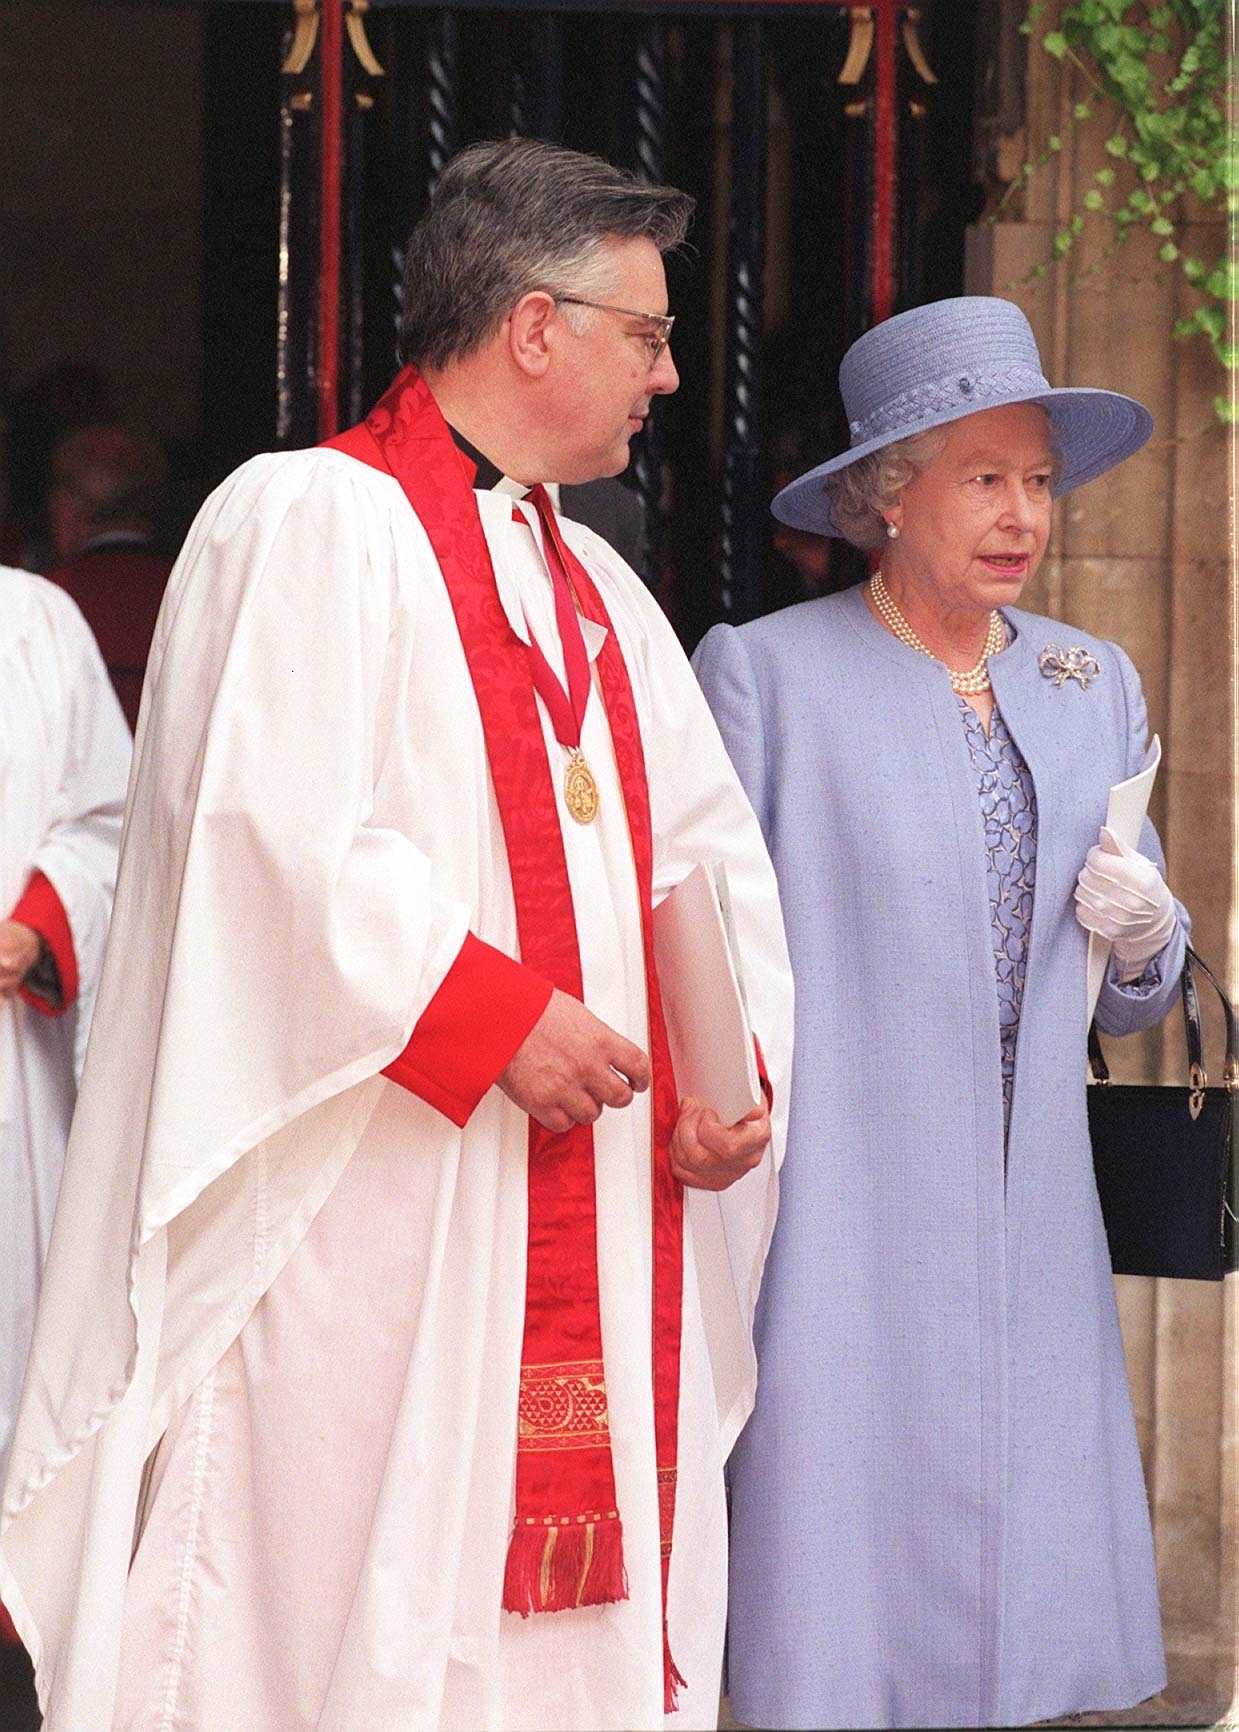 The Queen and Dean Wesley Carr at Westminster Abbey, for today's (Thursday) service for the unveiling of ten new statues commemorating Christian martyrs. 